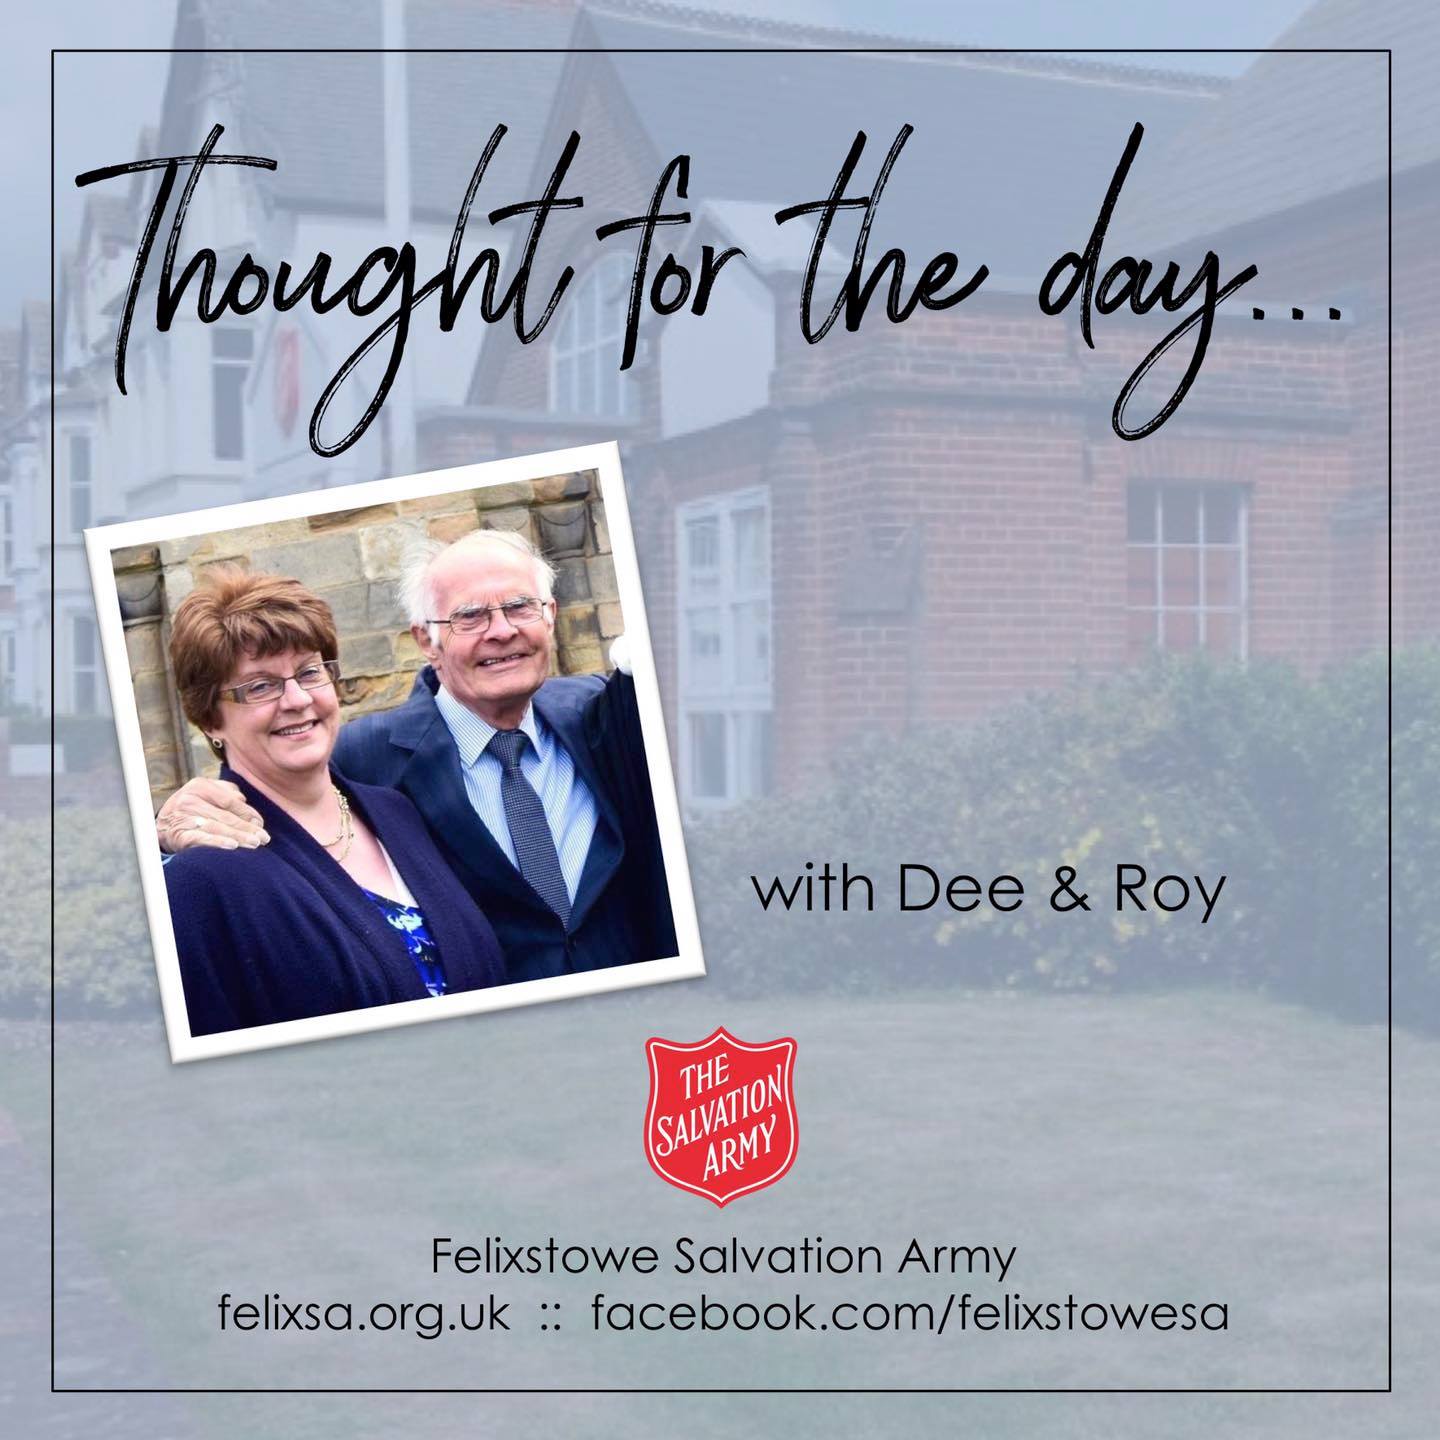 Thought for the Day – Dee and Roy’s music ‘Goodness of God’